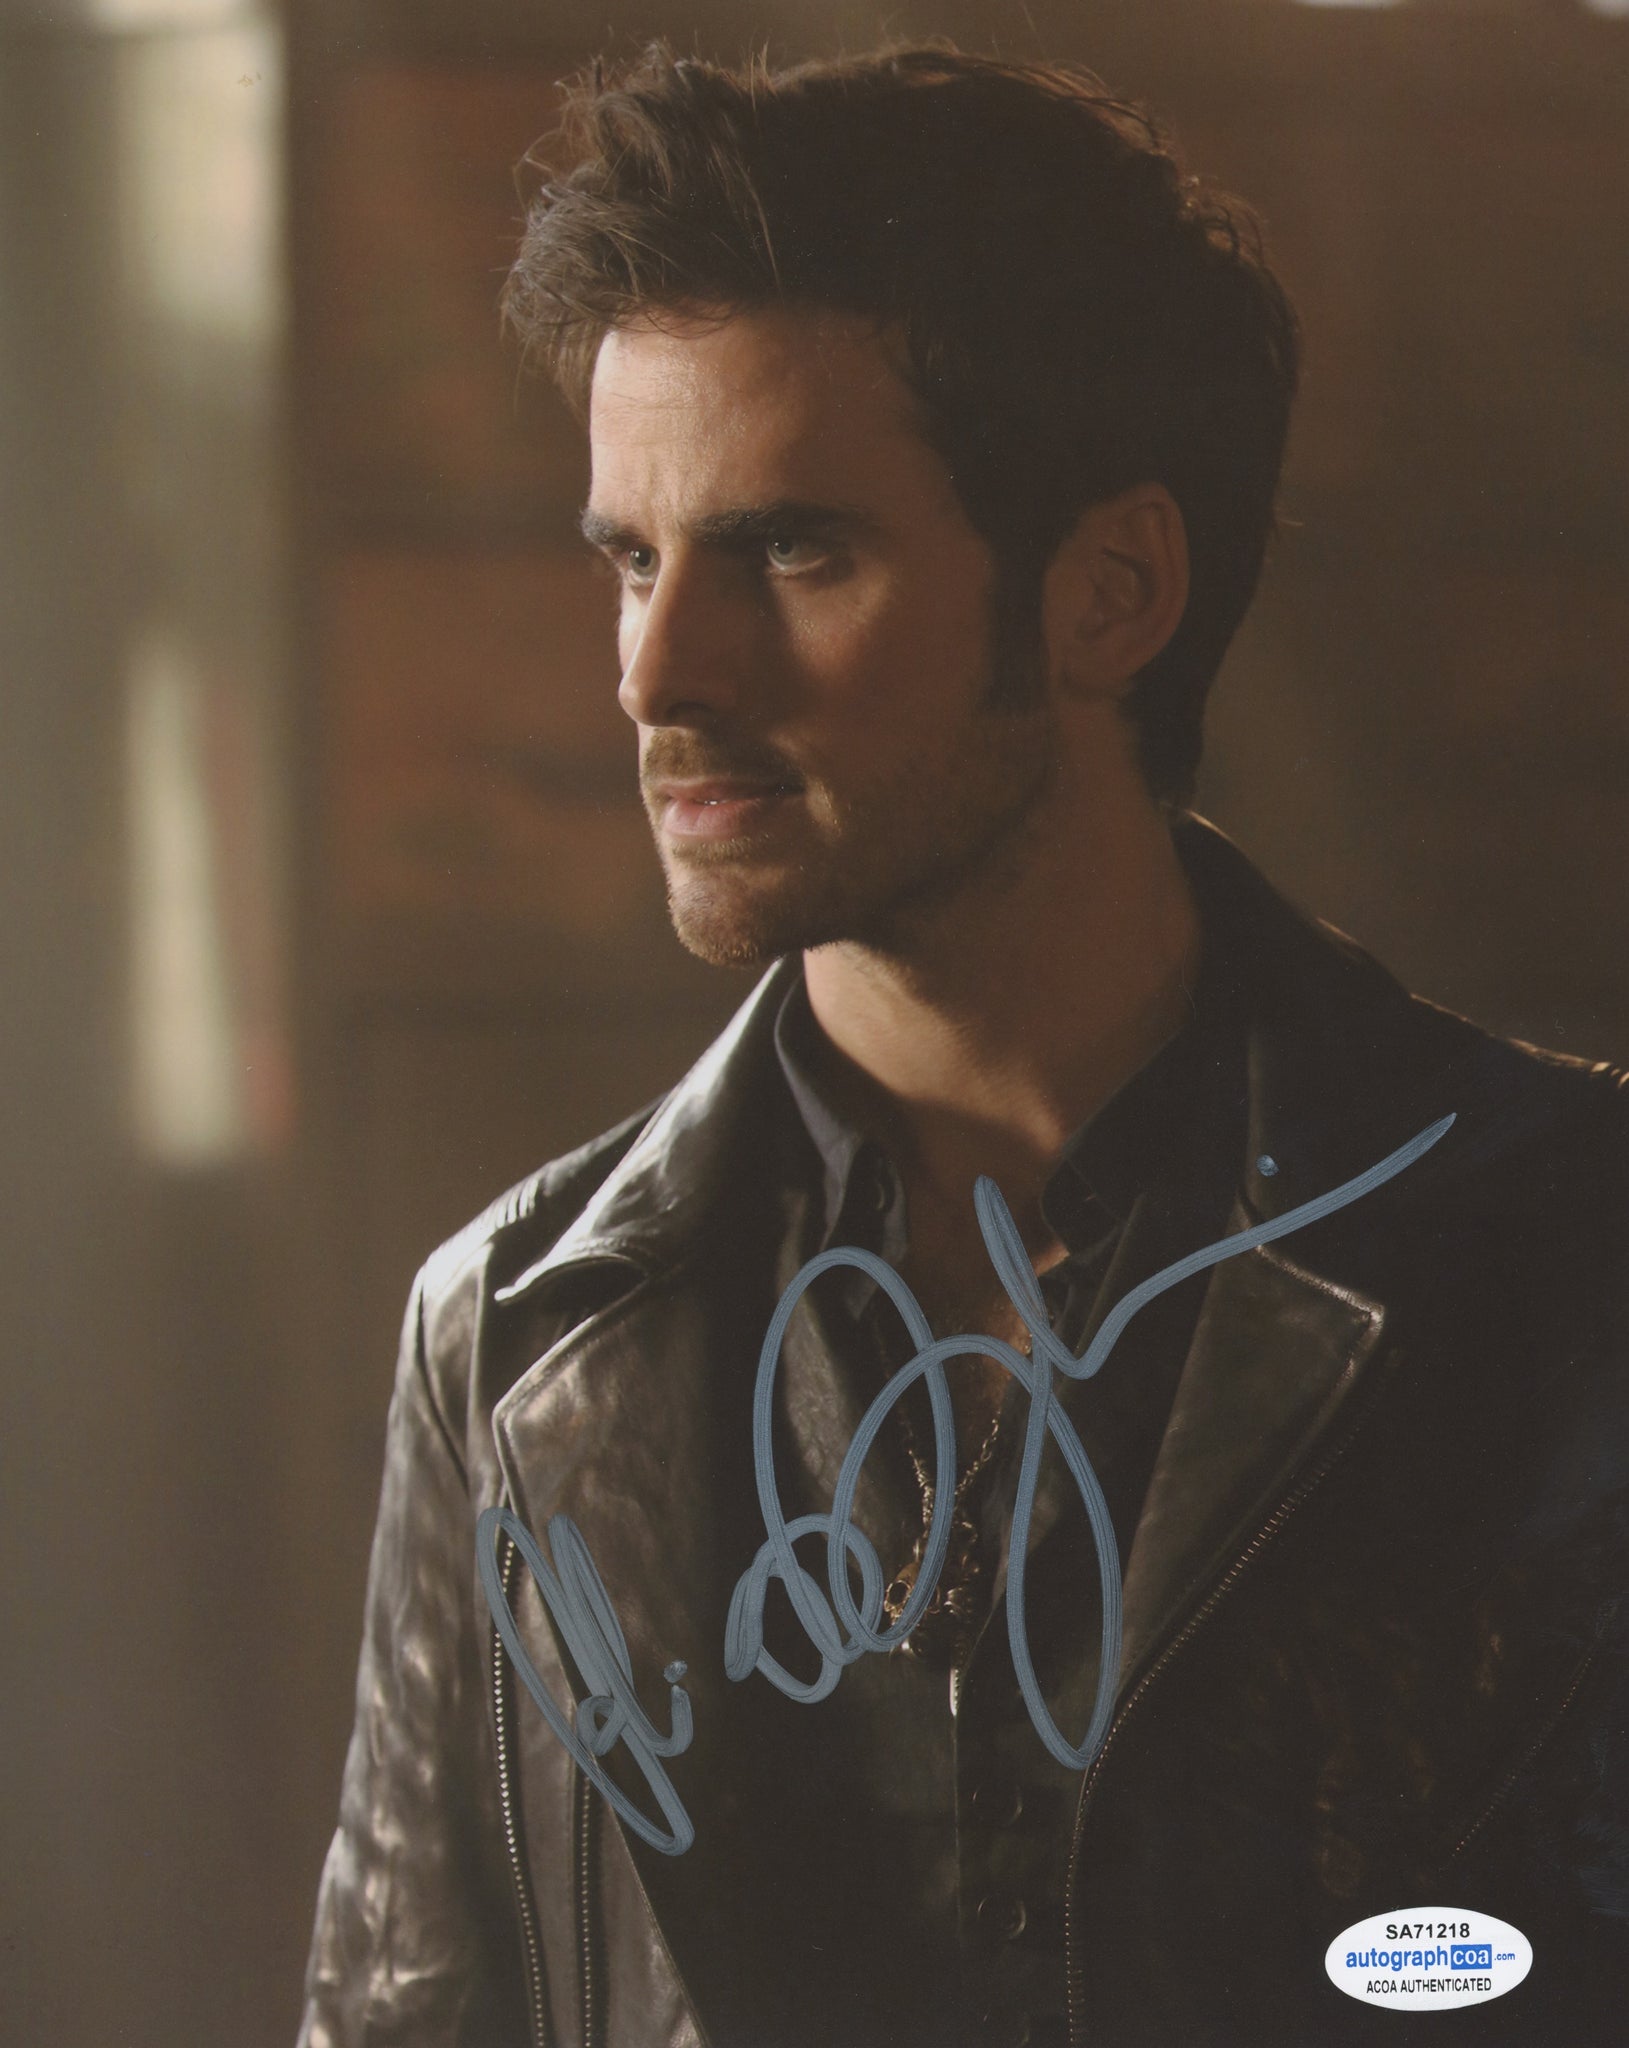 Colin O'Donoghue Once Upon A Time Signed Autograph 8x10 Photo ACOA